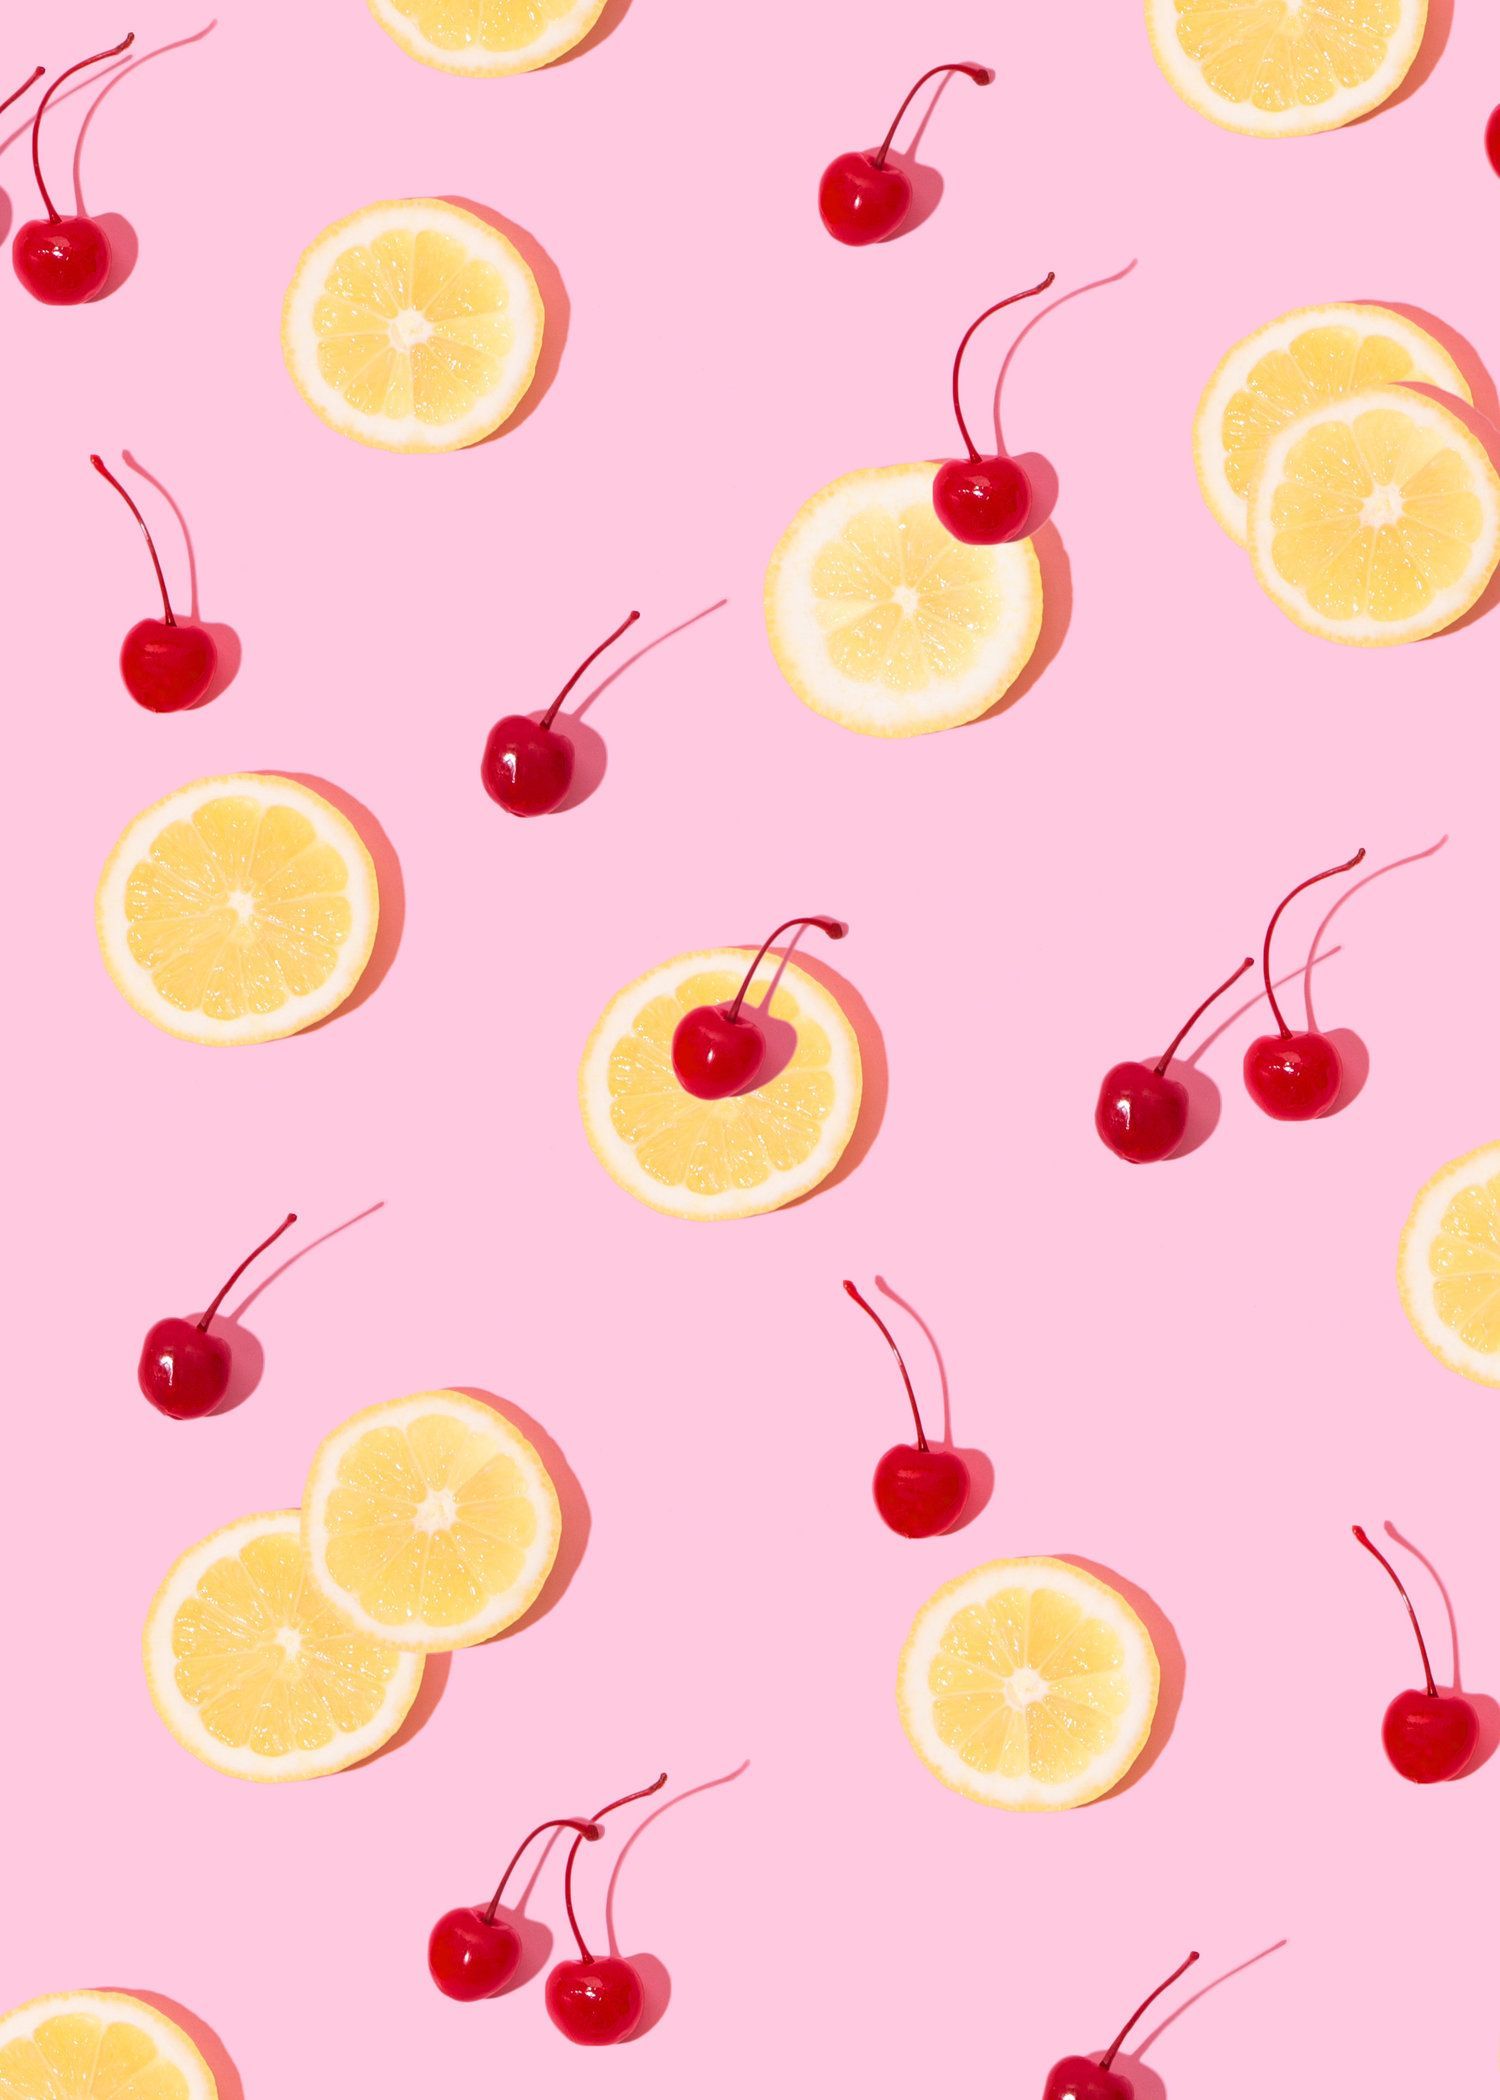 Cherry Wallpapers   Top Free Cherry Backgrounds